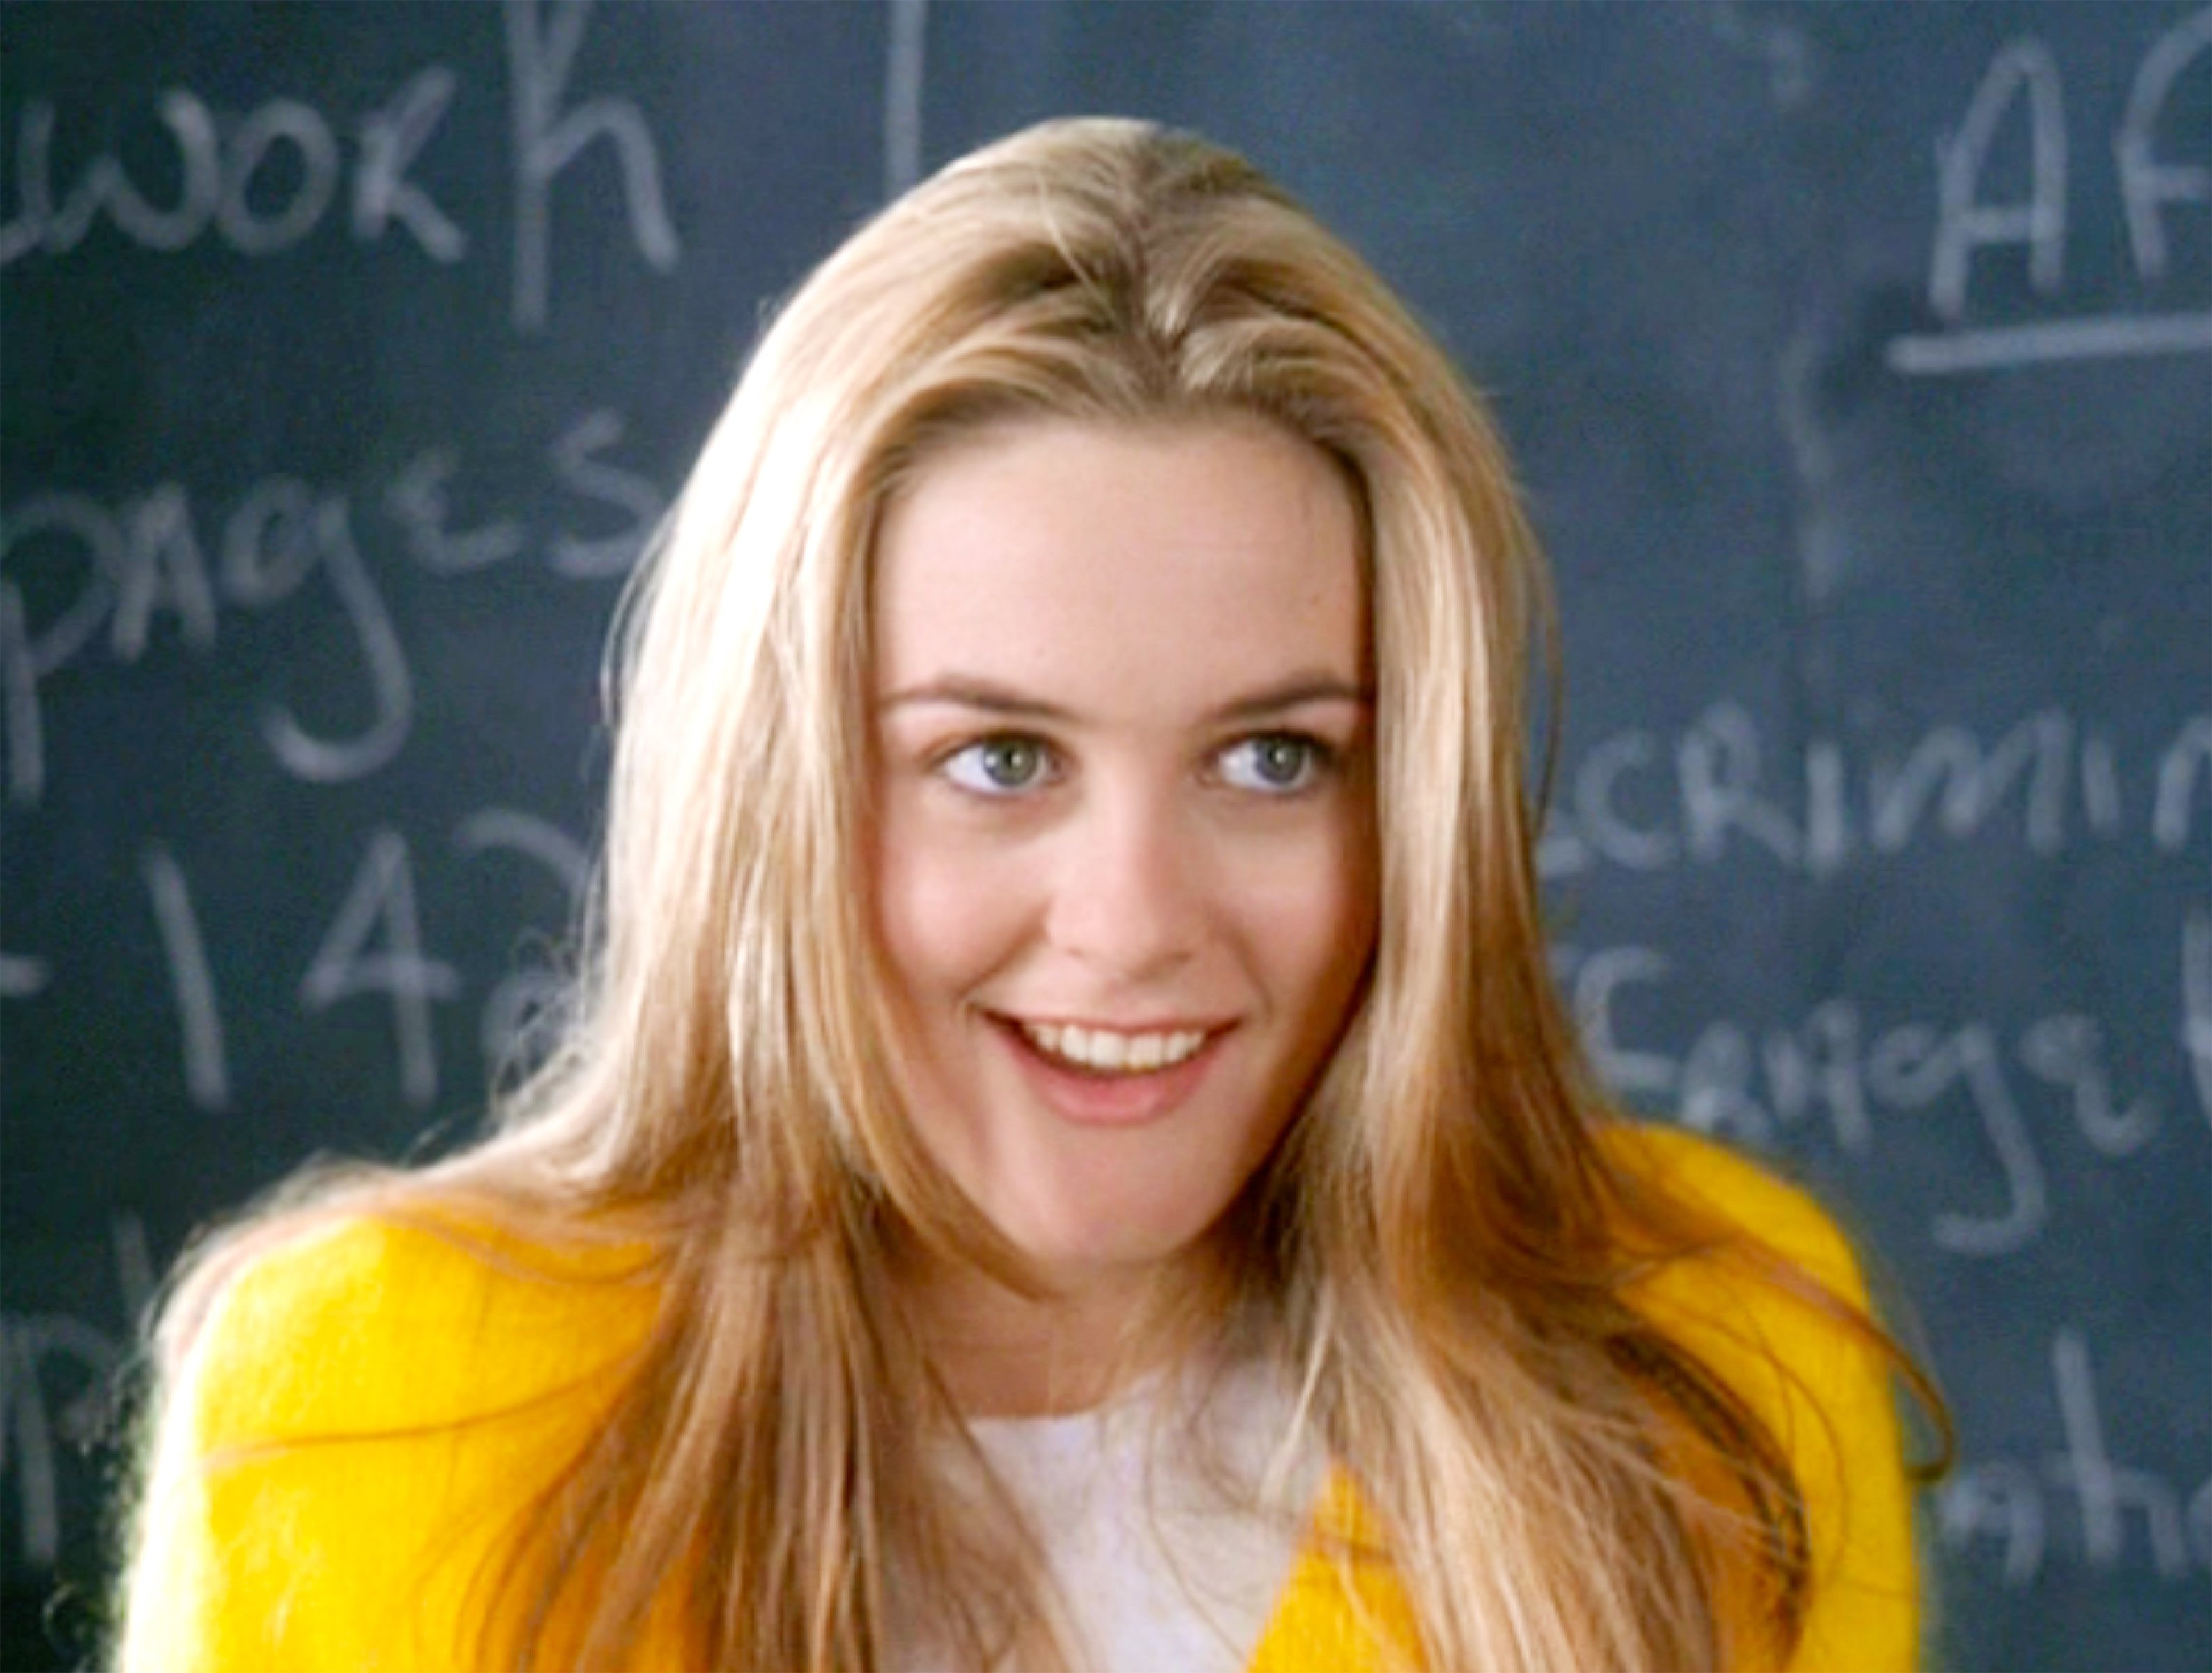 Alicia Silverstone as Cher, in front of a chalkboard, in 'Clueless'